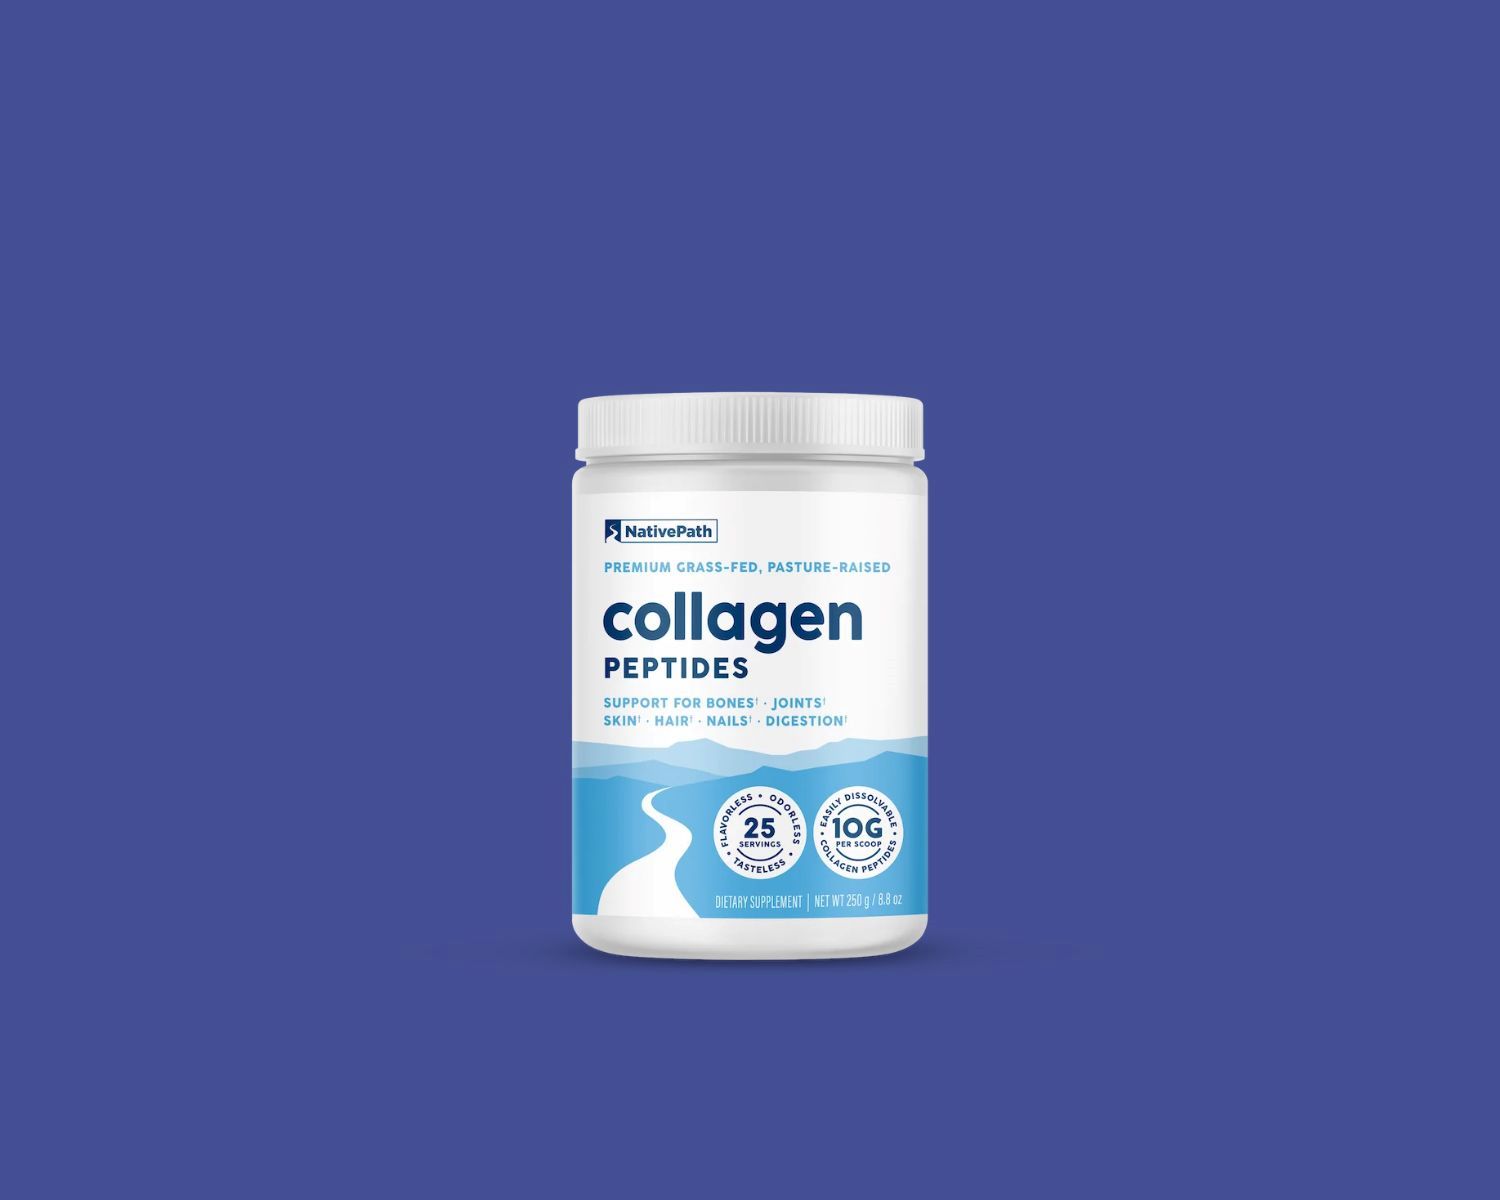 10-native-path-collagen-nutrition-facts